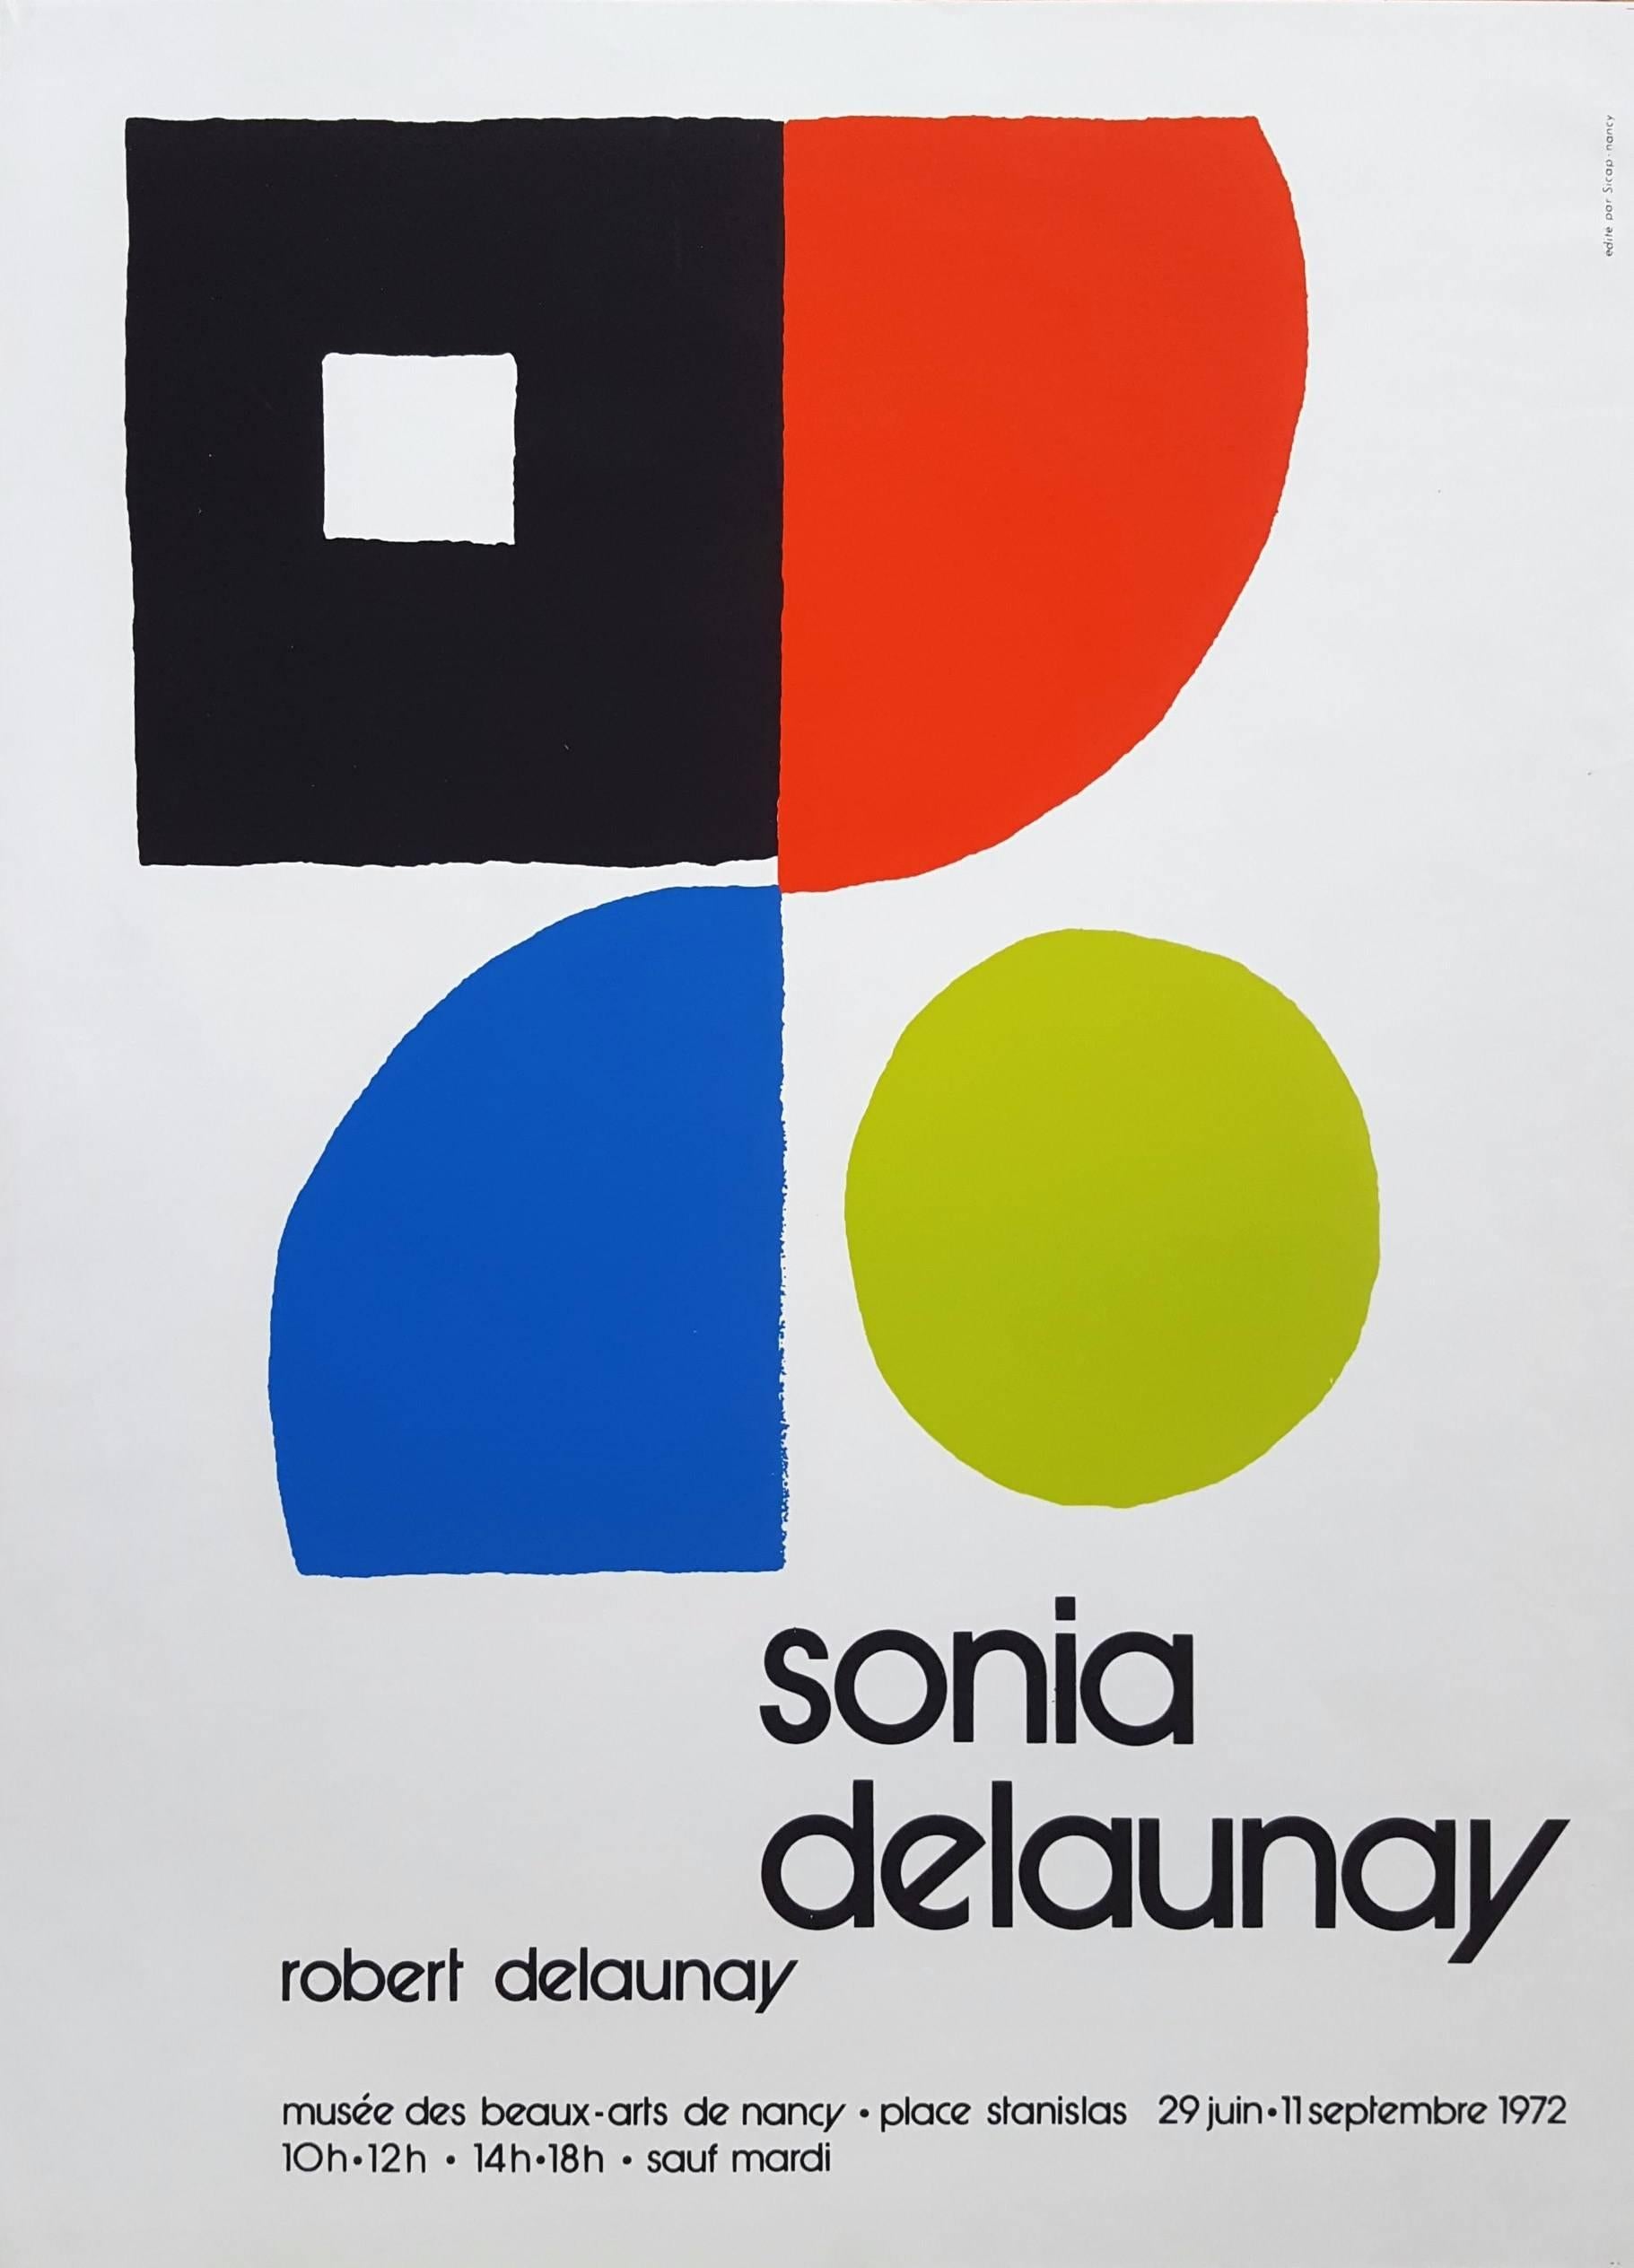 (after) Sonia Delaunay Abstract Print - Musee des Beaux-Arts: Sonia Delaunay & Robert Delaunay